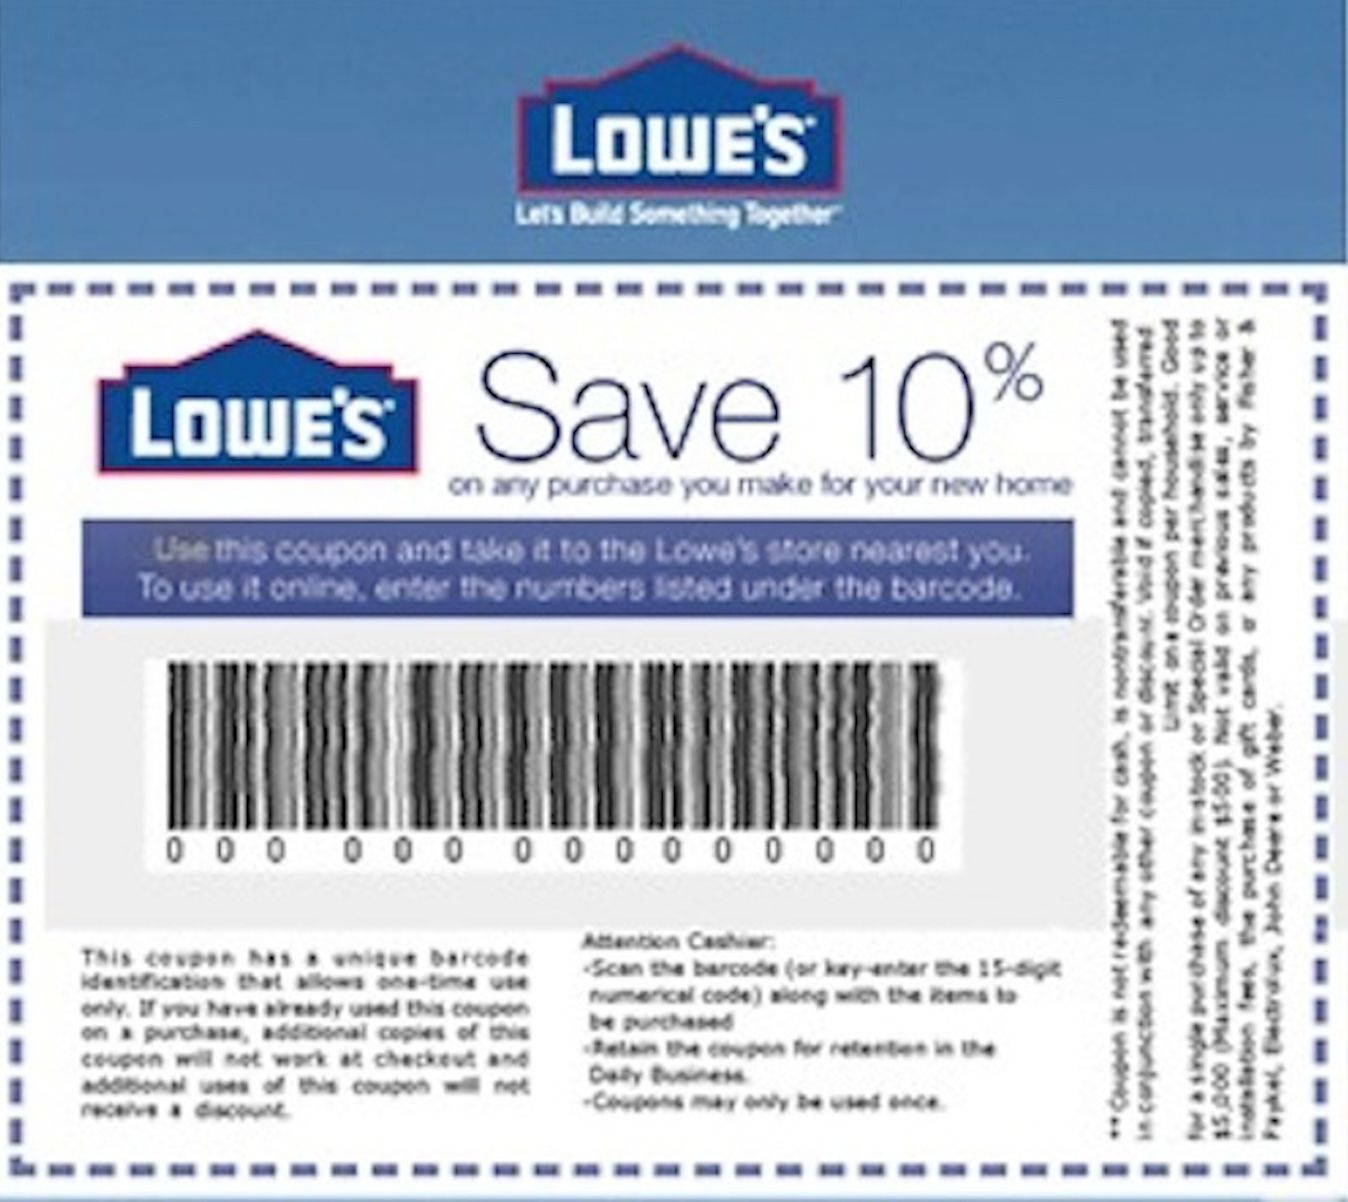 Coupons Five 5x Lowes 10 Off Printable Coupons Exp 5 31 17 Lowes Coupons 20 Free Printable 